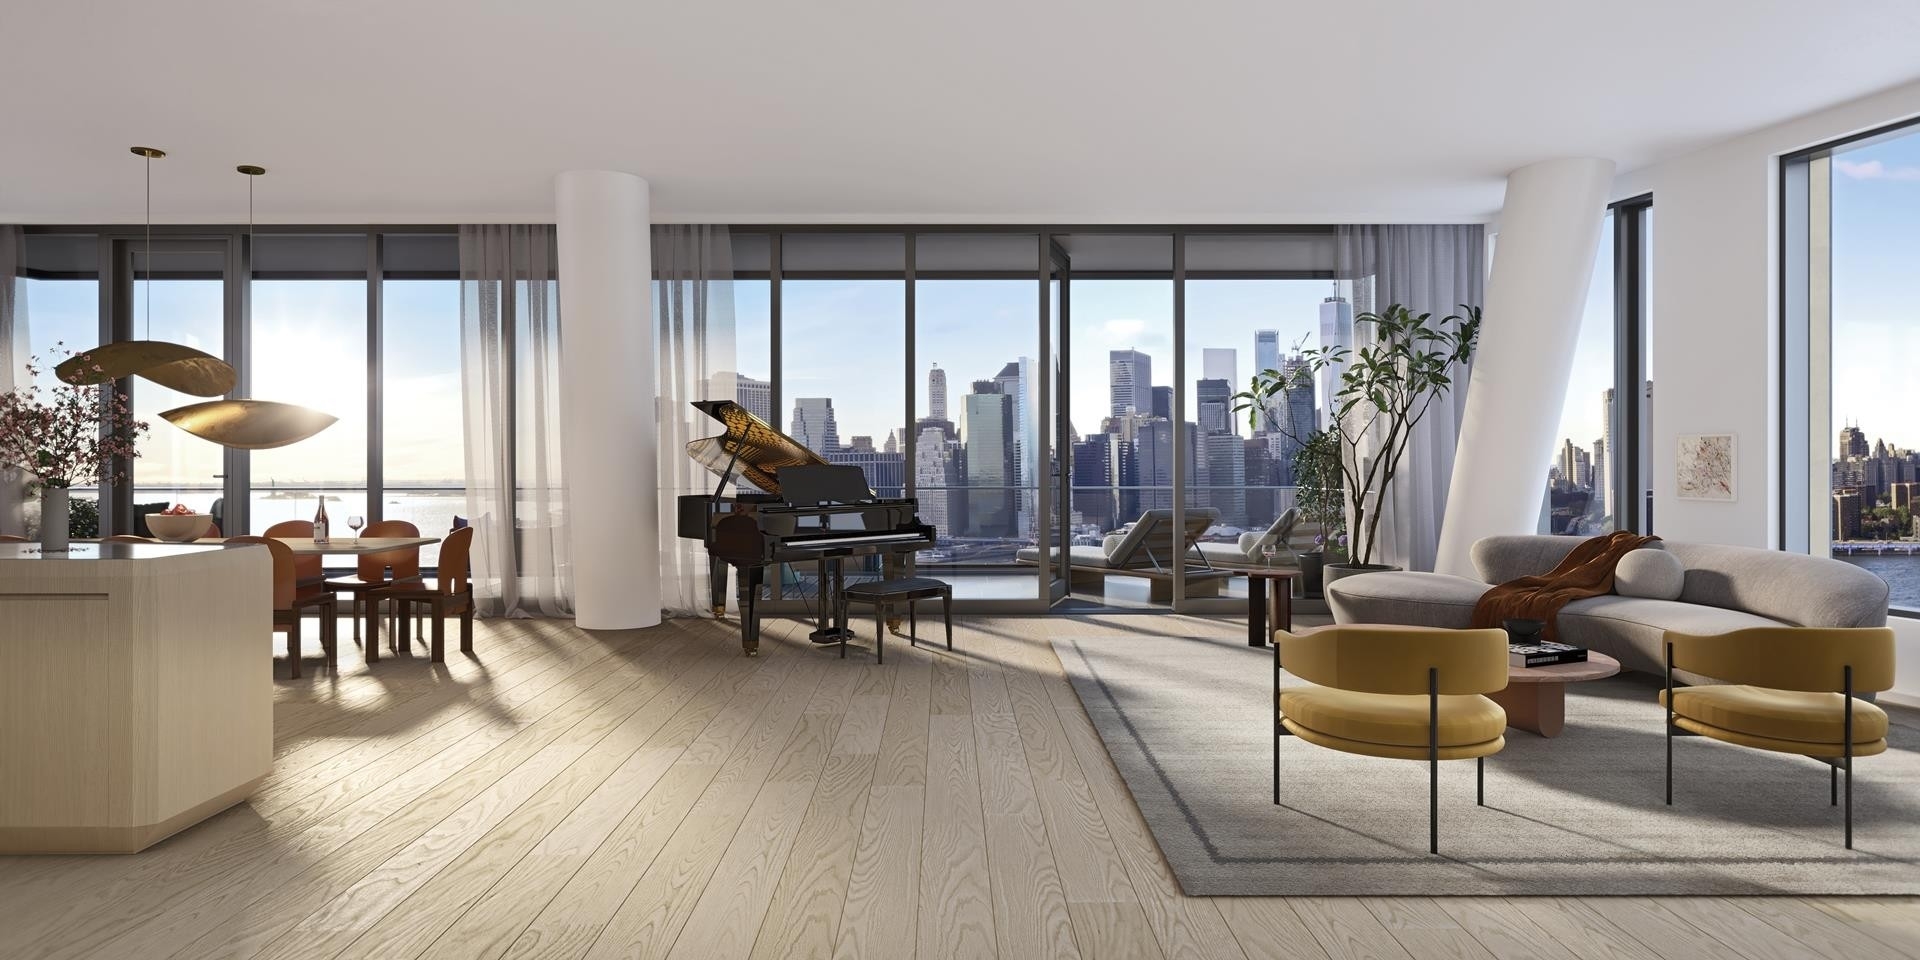 1. Condominiums for Sale at Olympia Dumbo, 30 FRONT ST, 29A Brooklyn, New York 11201